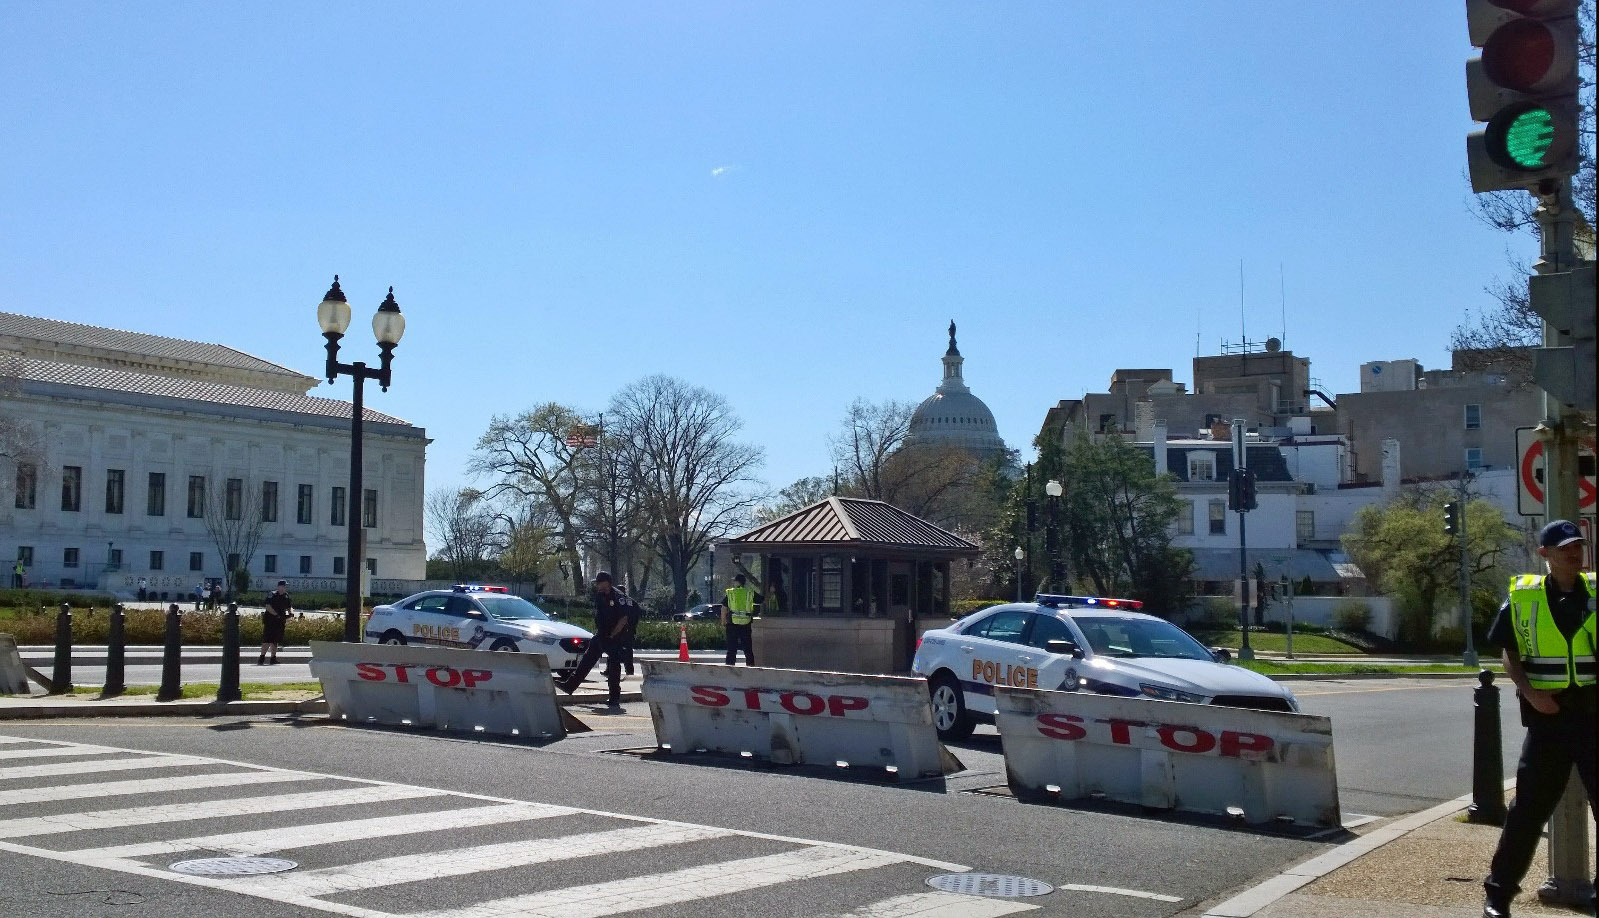 Barricades are raised after reports of shots fired at the U.S. Capitol Visitor's Center Wednesday afternoon. (WTOP/Megan Matthews)